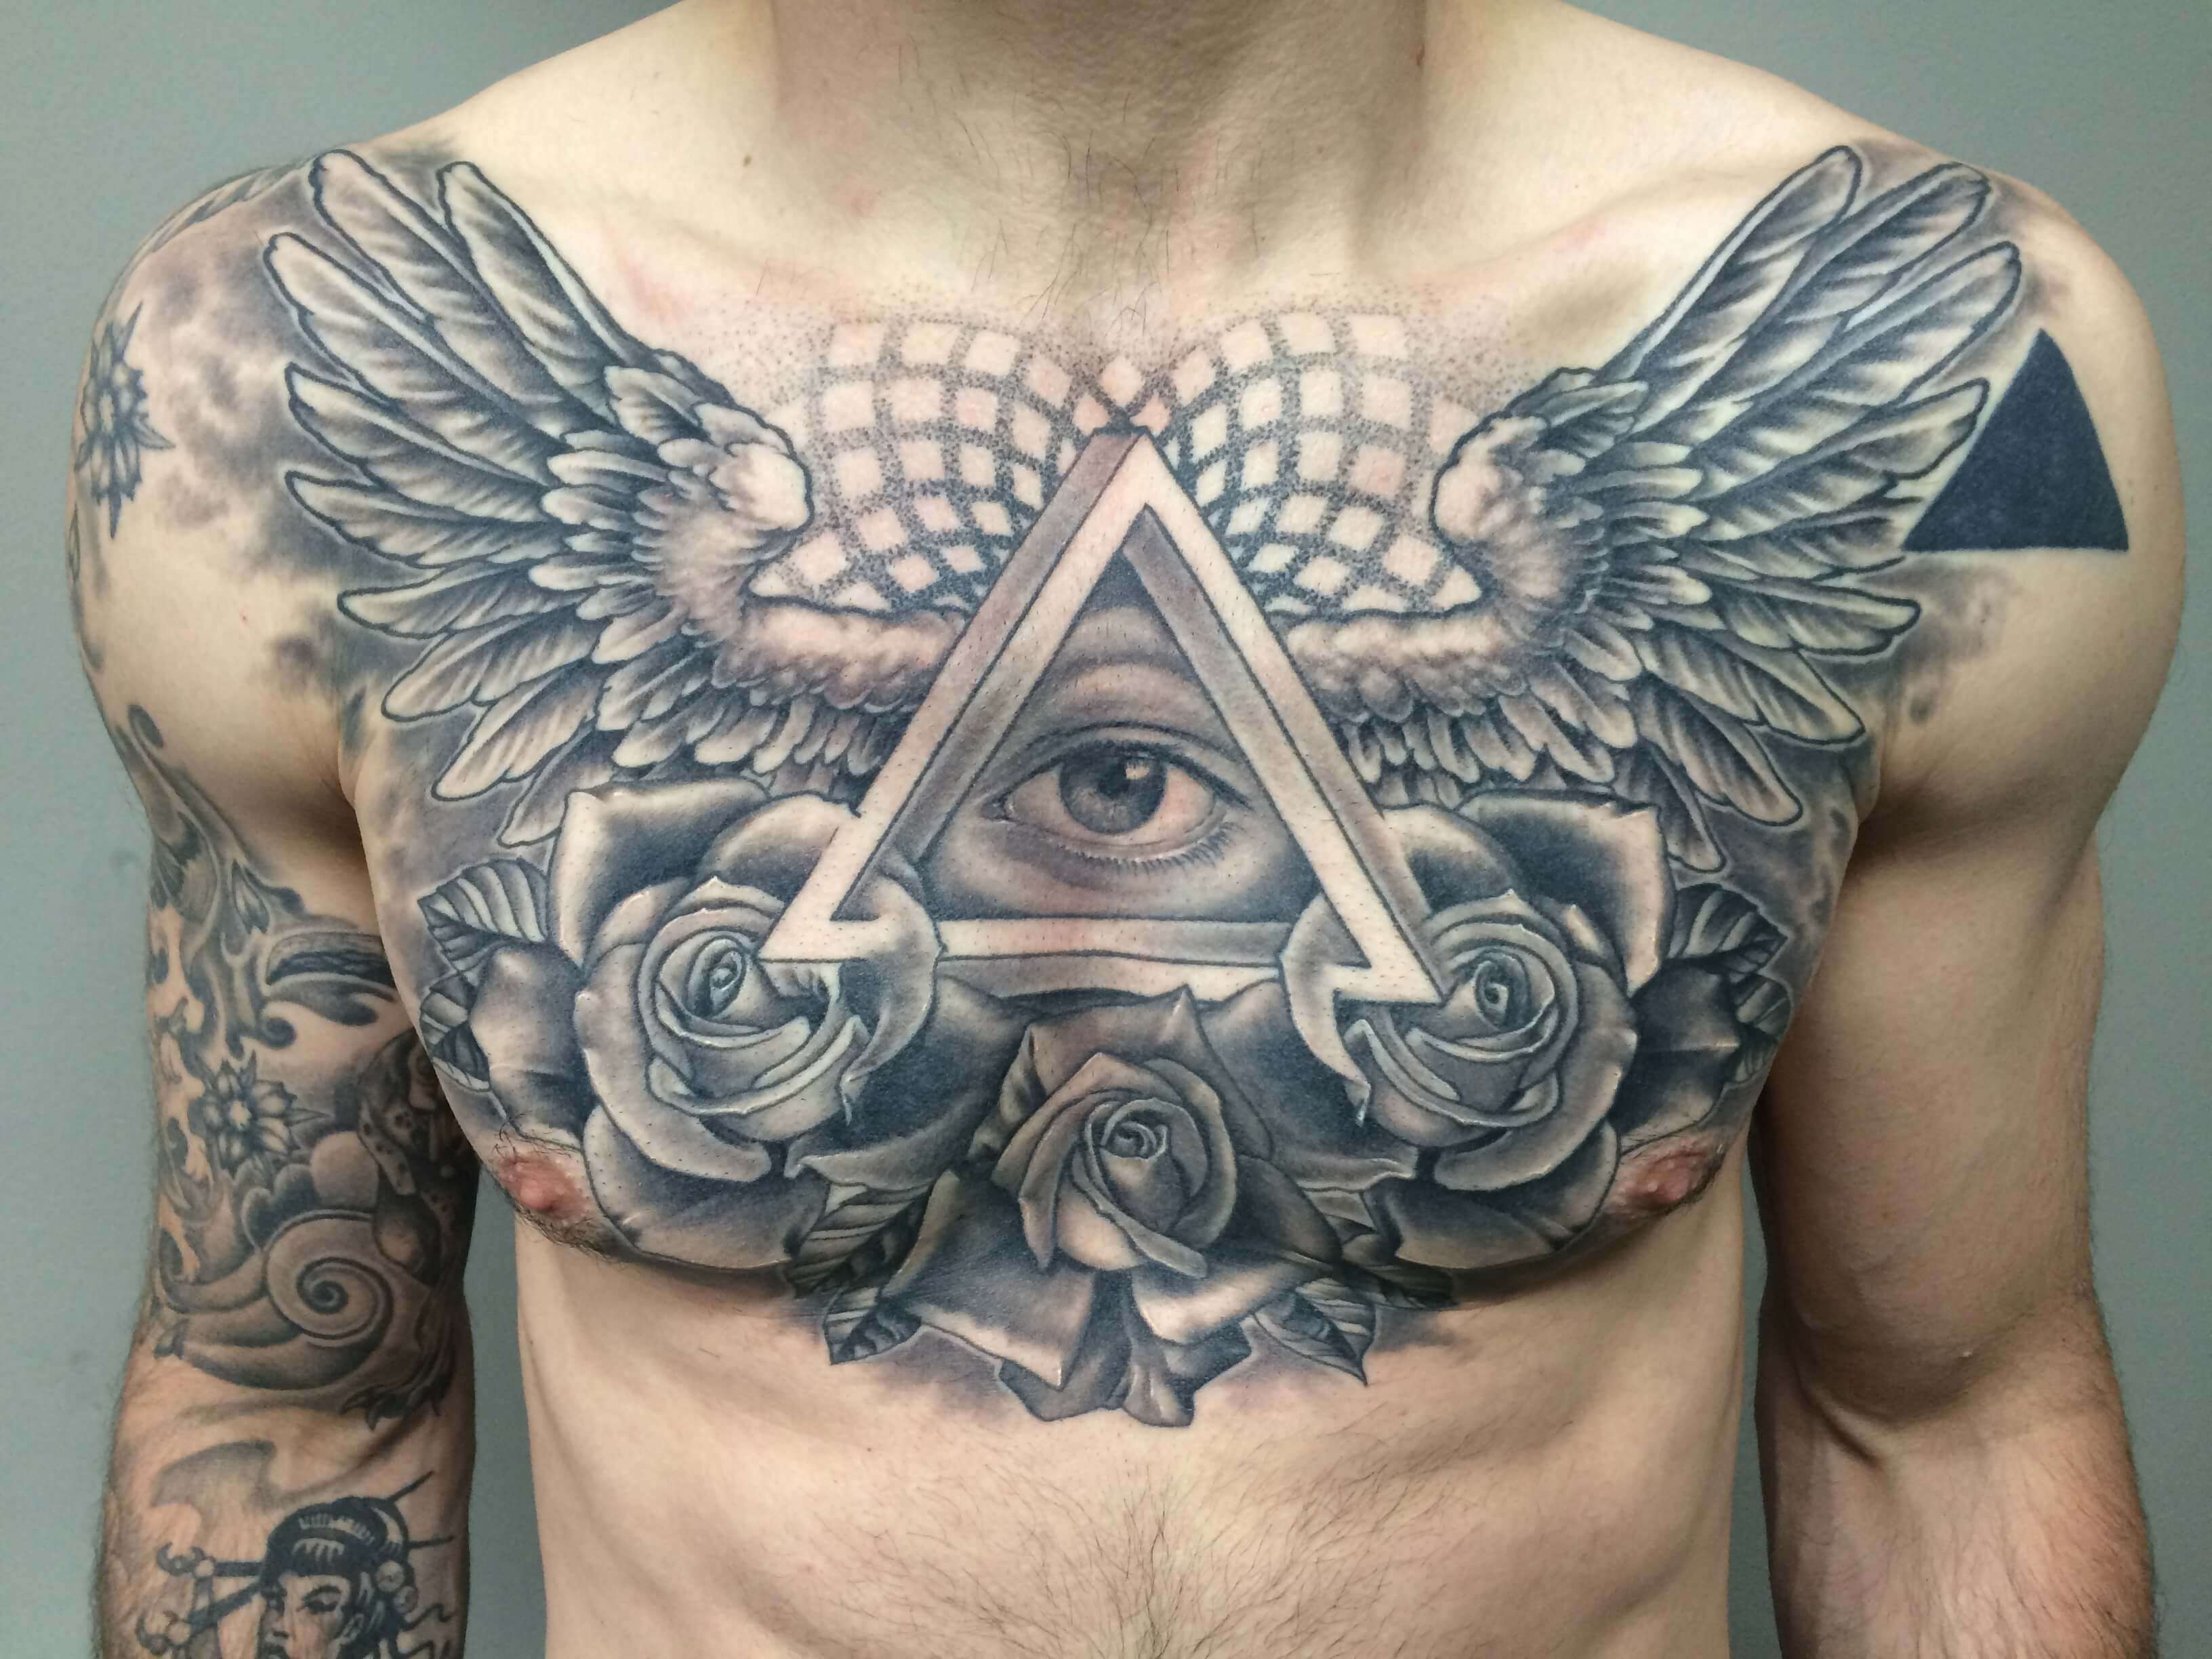 The 100 Best Chest Tattoos For Men Improb intended for dimensions 3264 X 2448